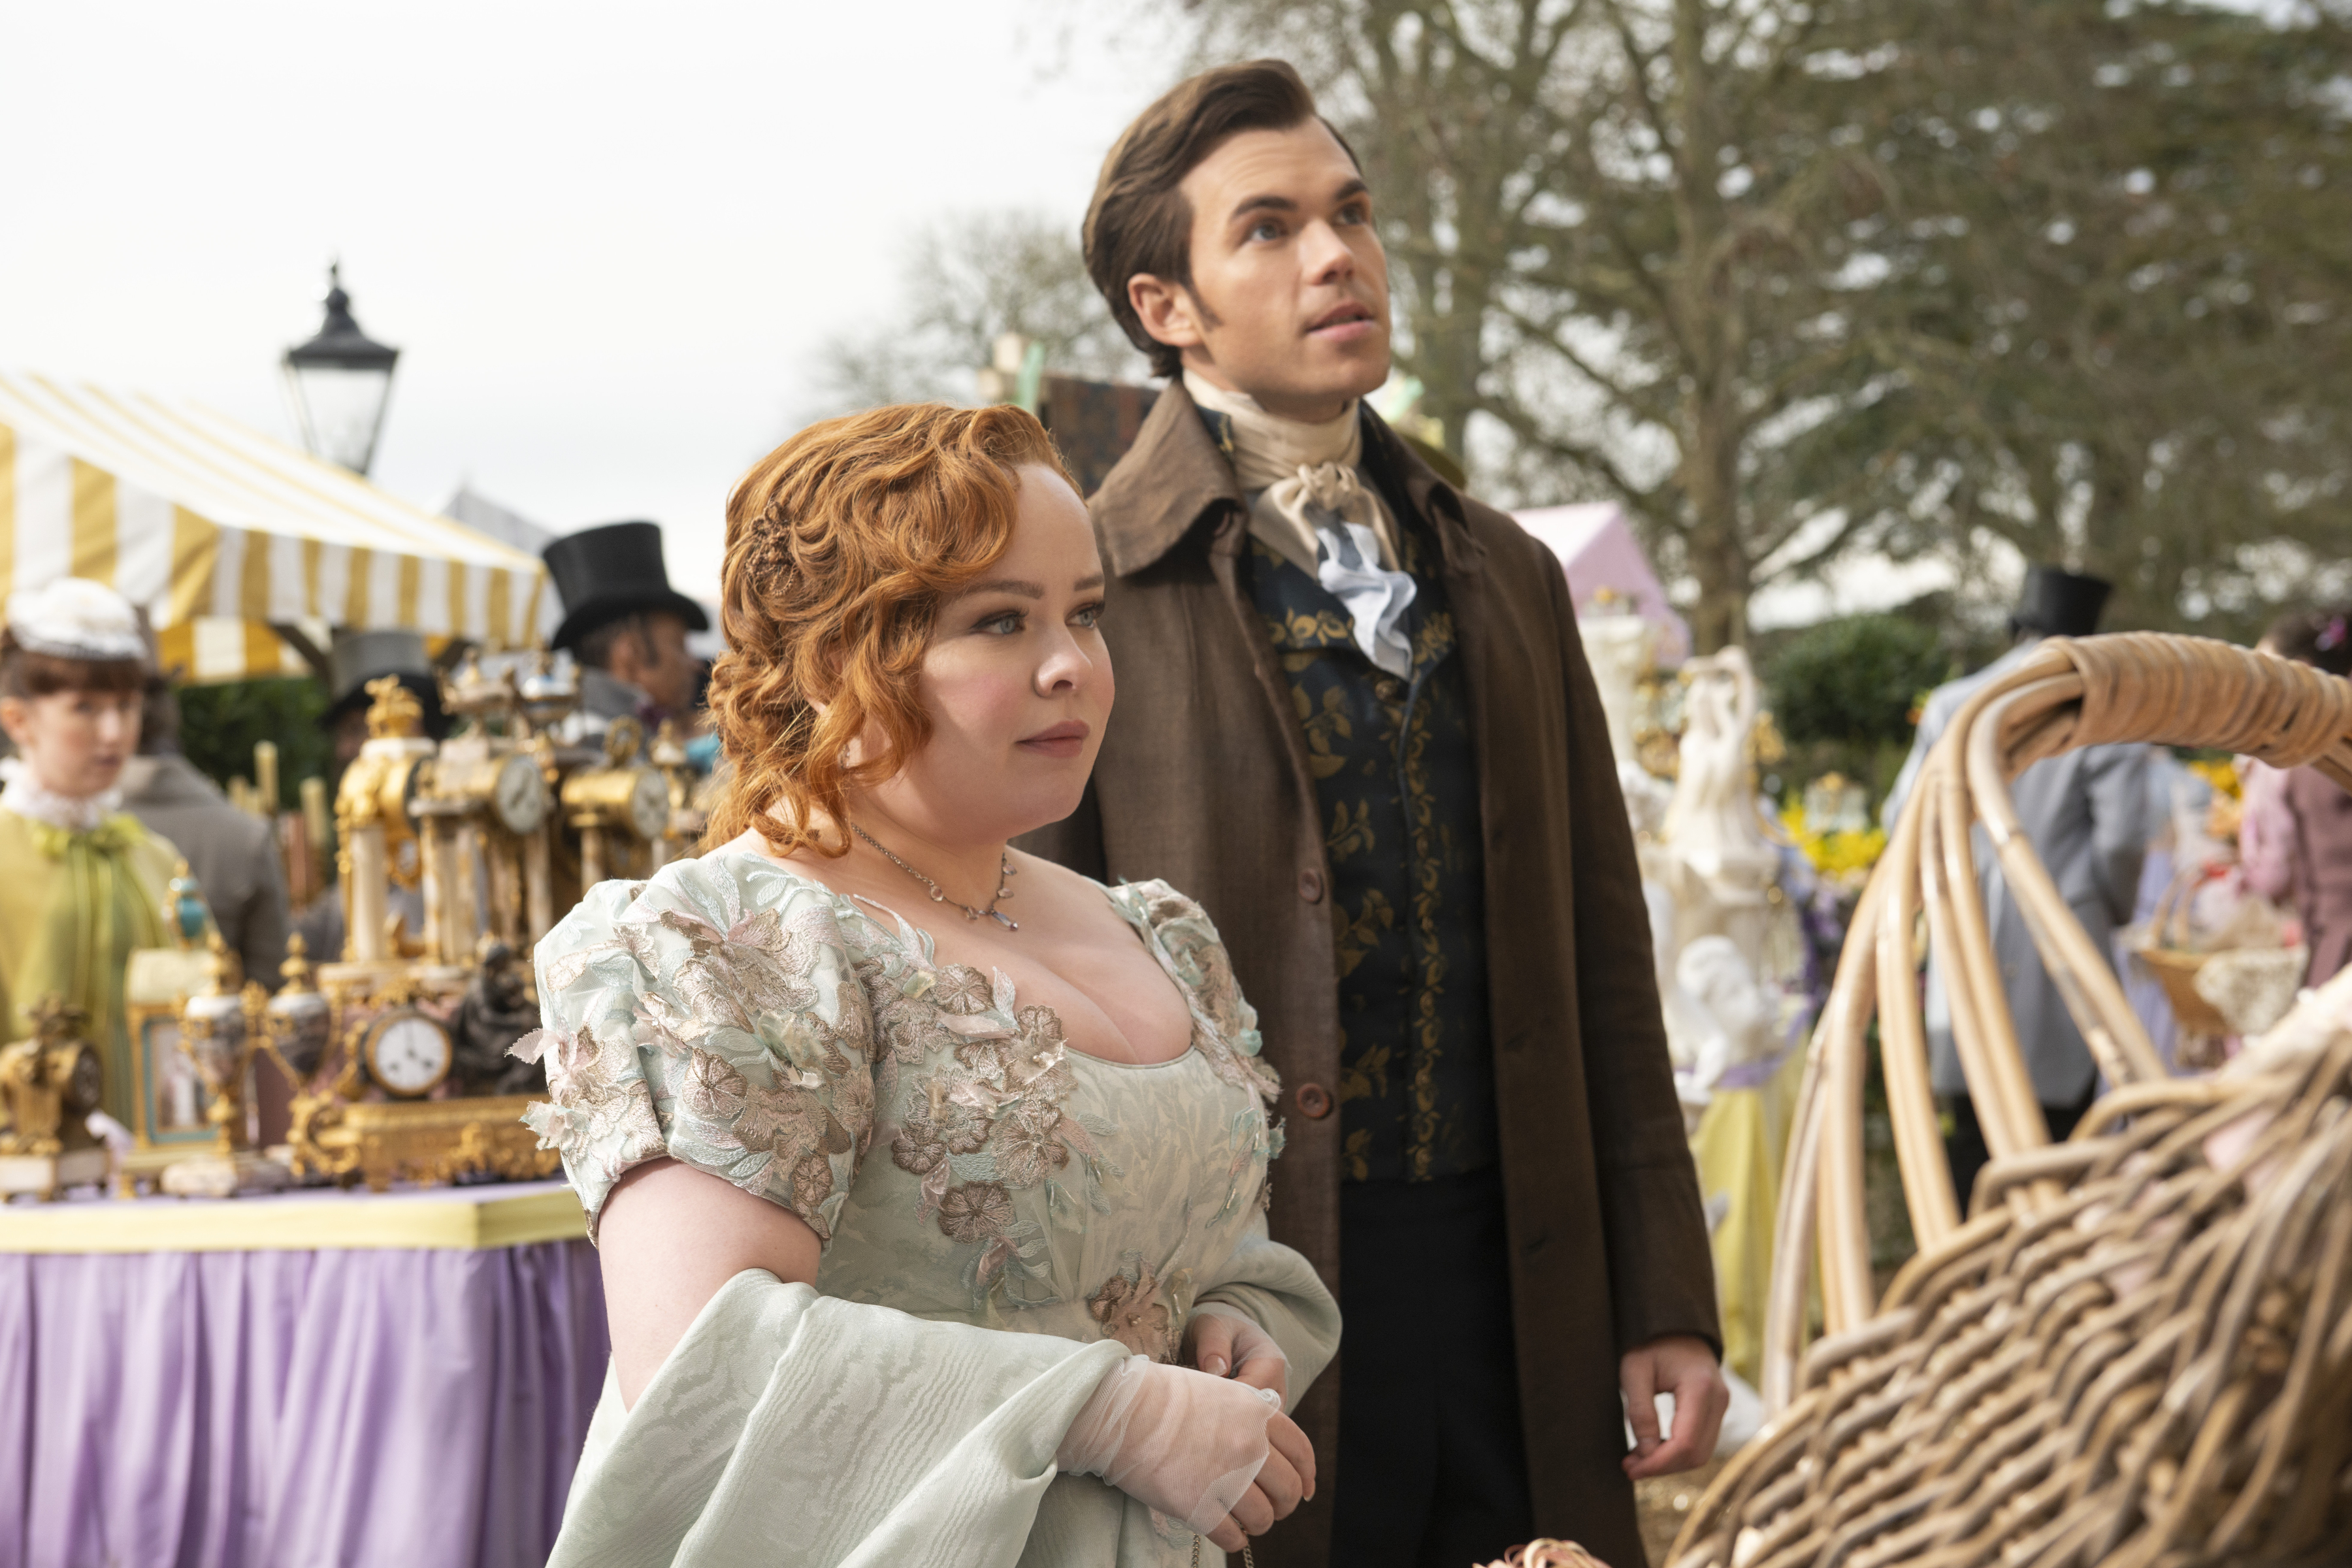 Penelope Featherington and Colin Bridgerton in historical attire at a daytime outdoor market